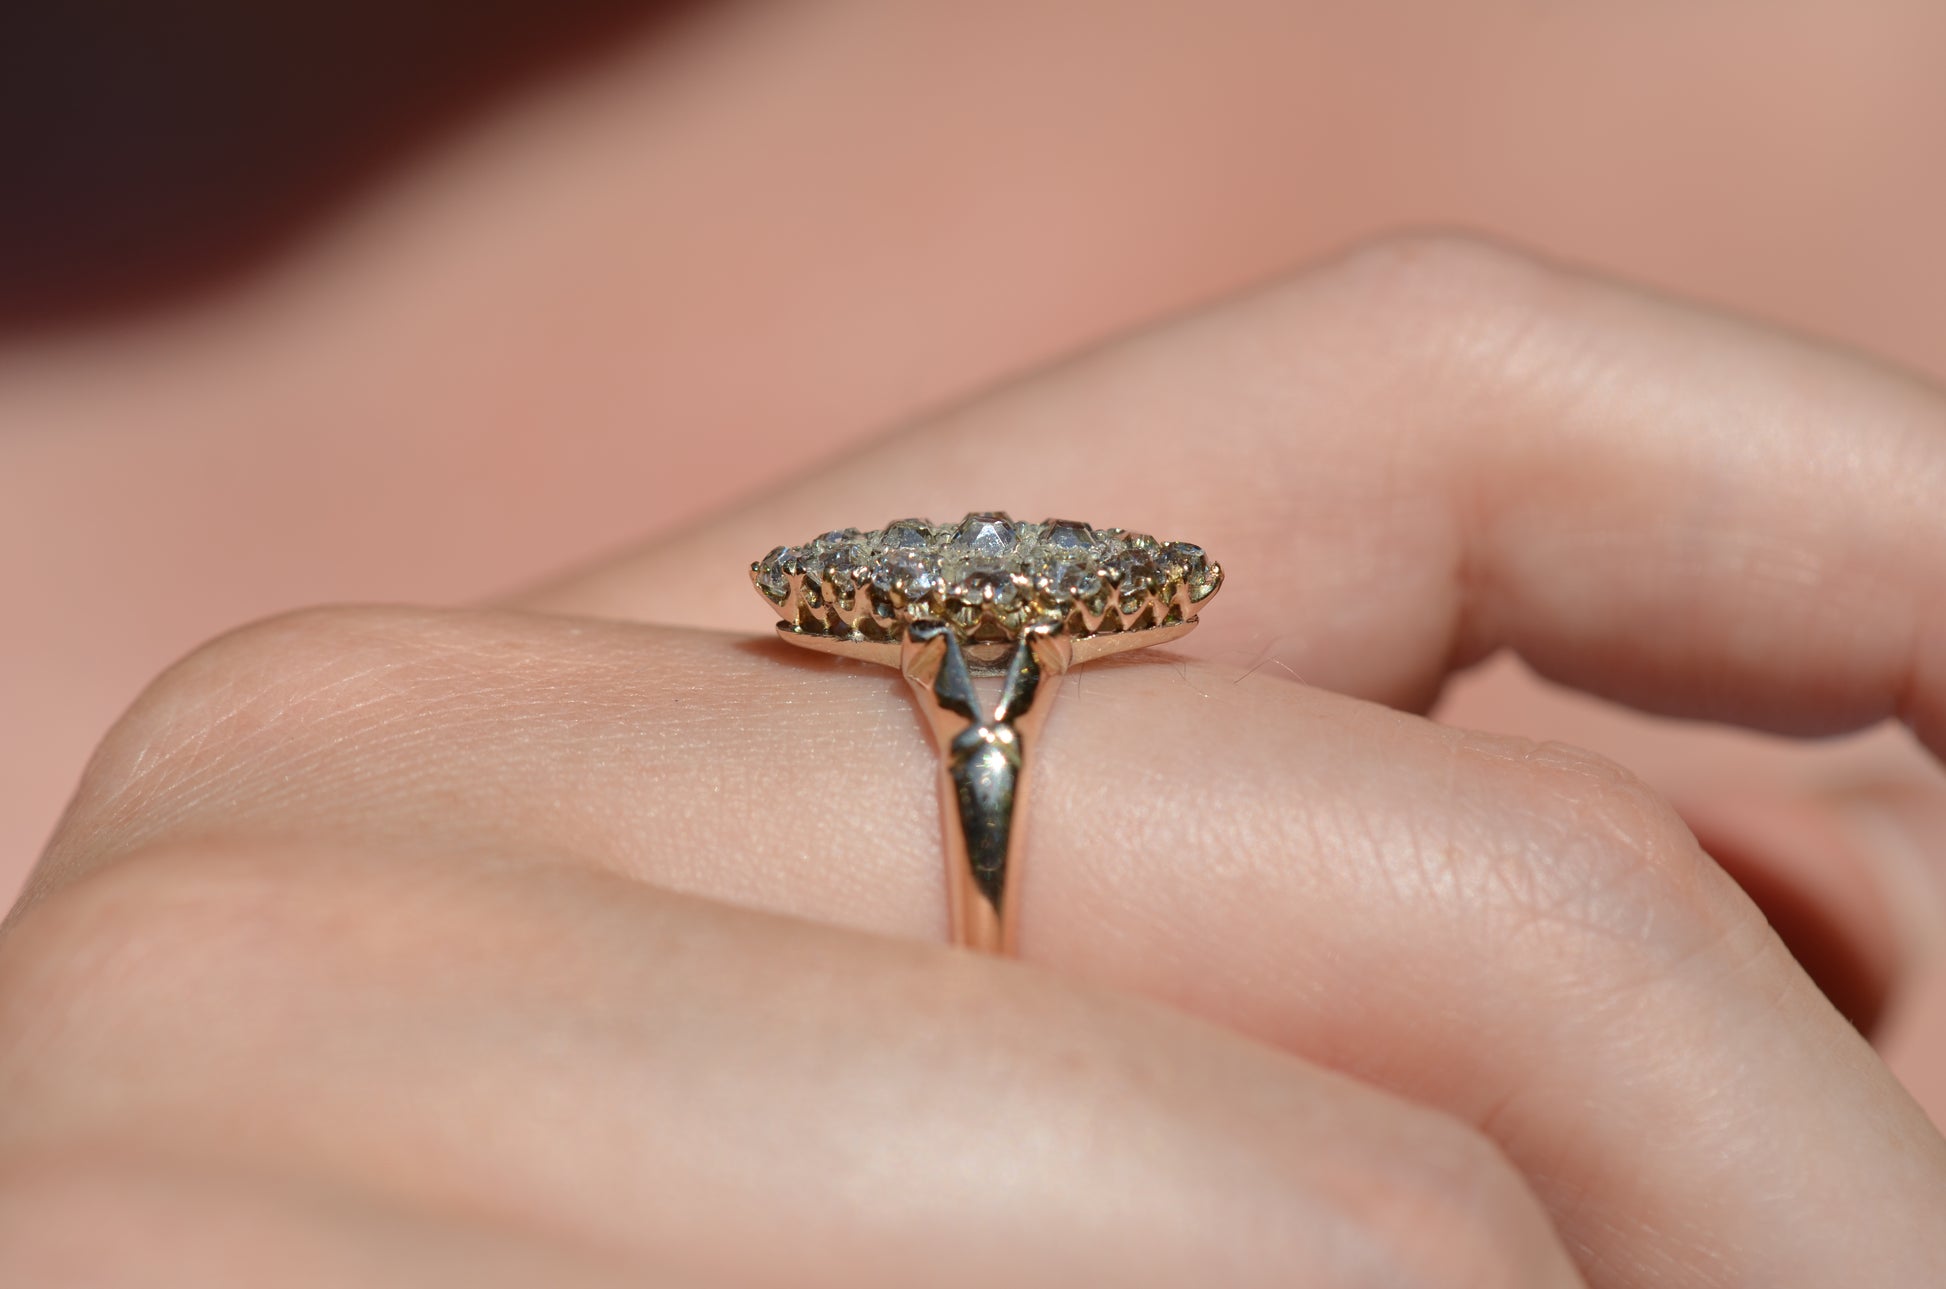 A closely cropped macro photo of the antique ring on a Caucasian model's right middle finger to show scale, photographed in natural light that dazzles on the diamonds. Shown in profile to highlight the low rise off the finger.